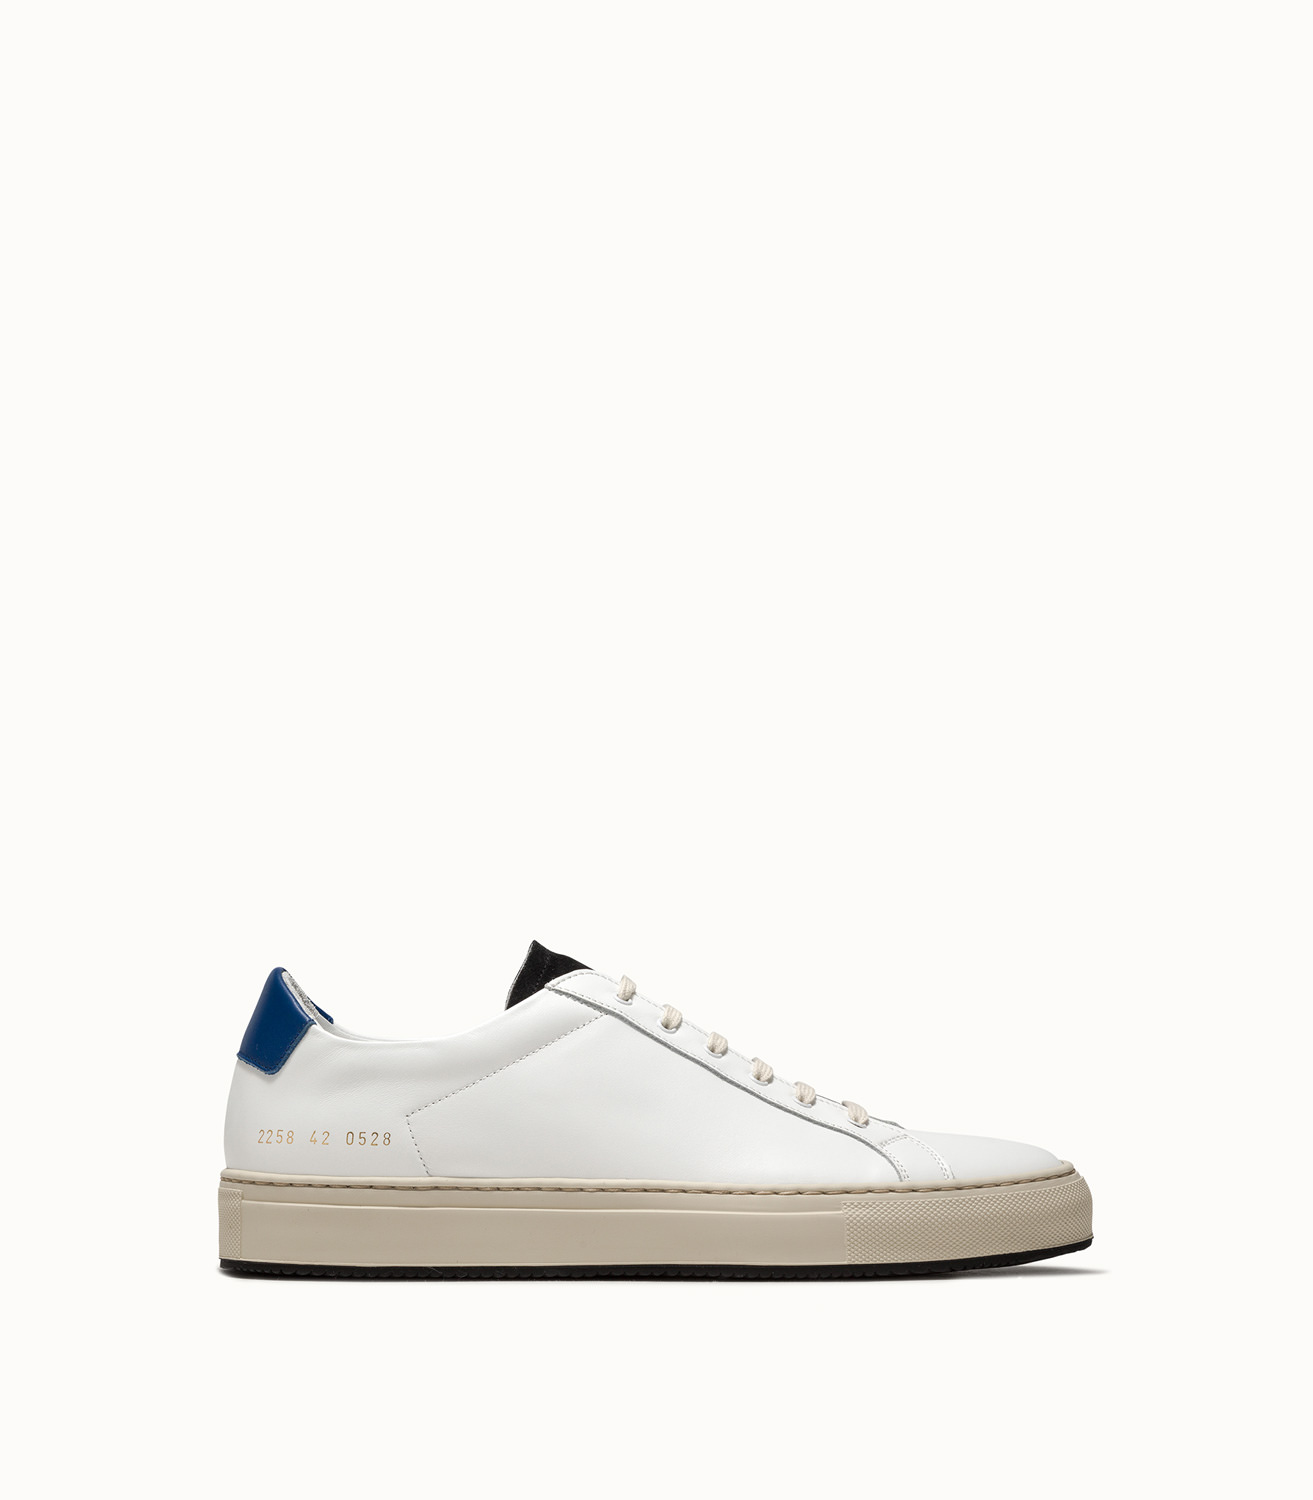 COMMON PROJECTS RETRO LOW SPECIAL 